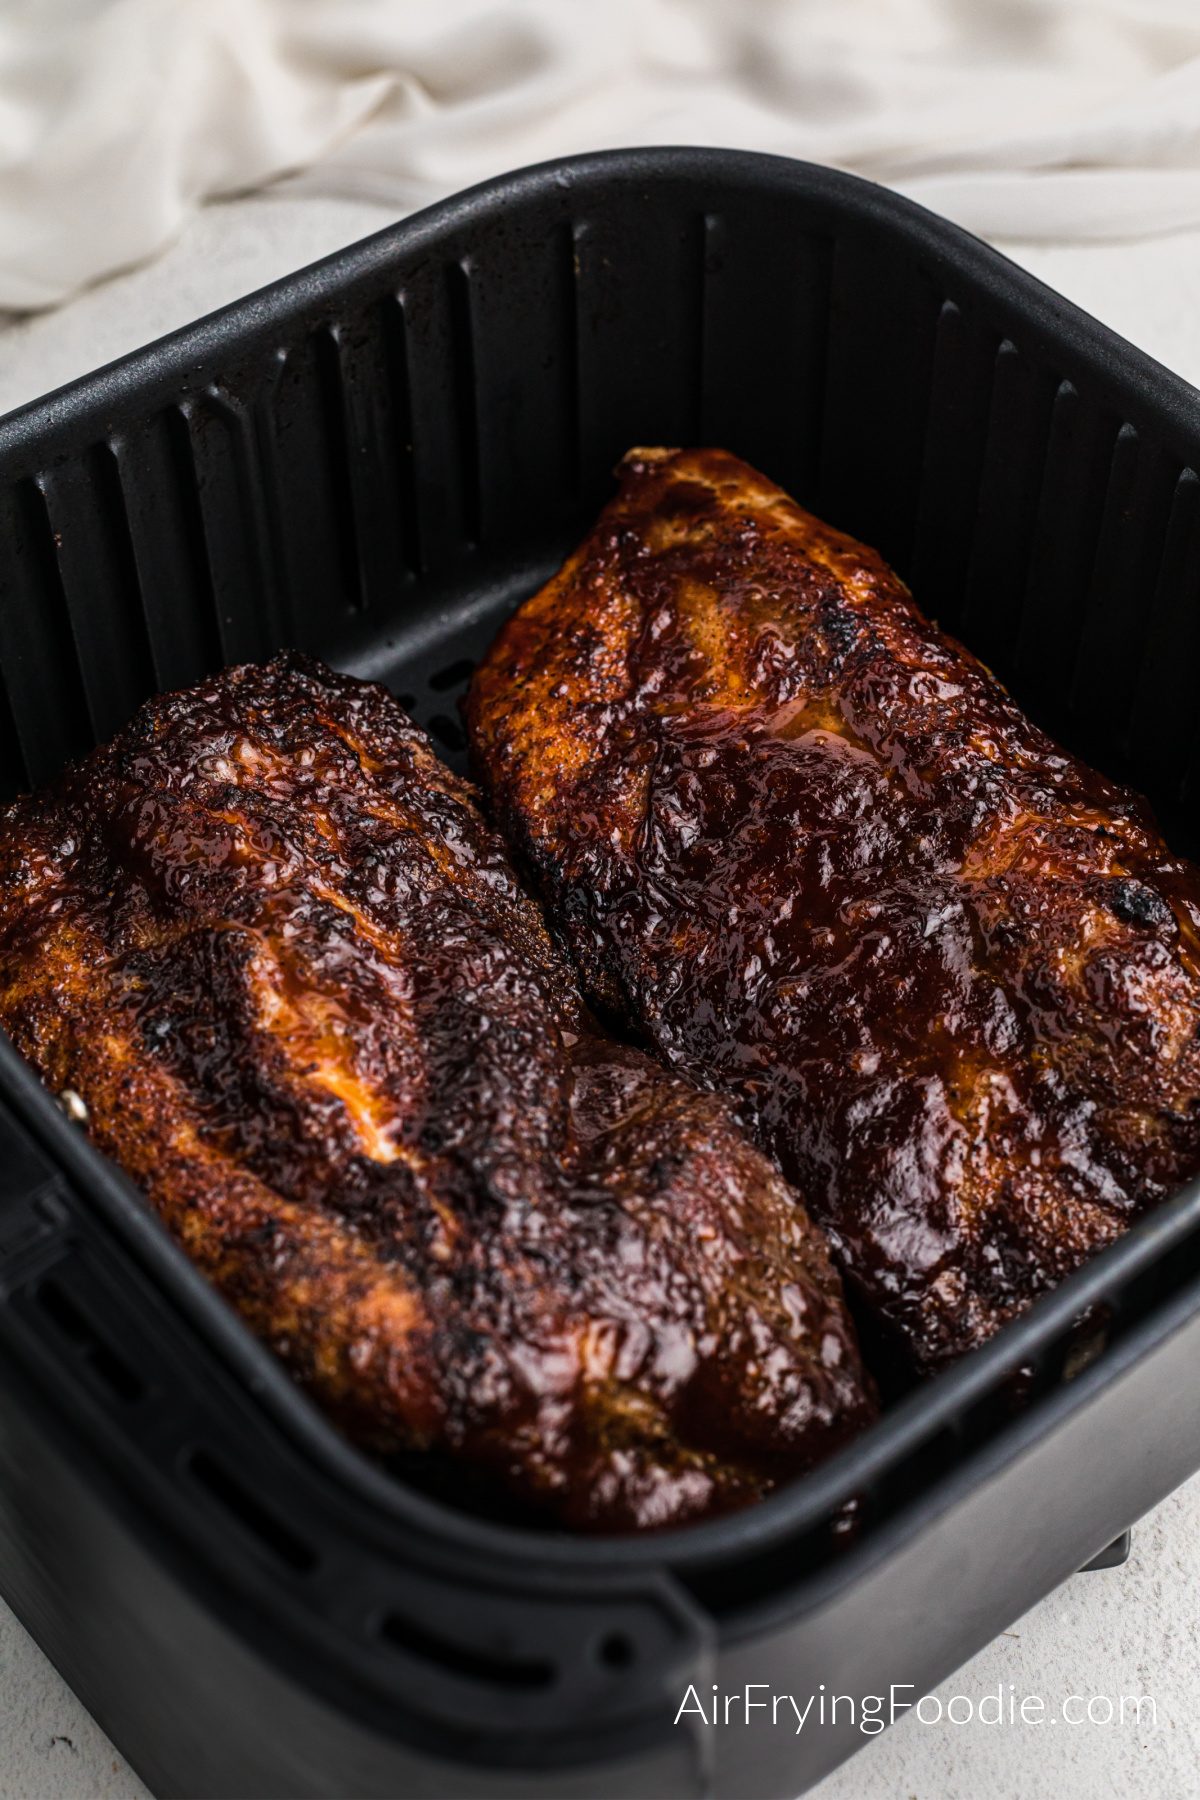 BBQ sauce on ribs in the air fryer.